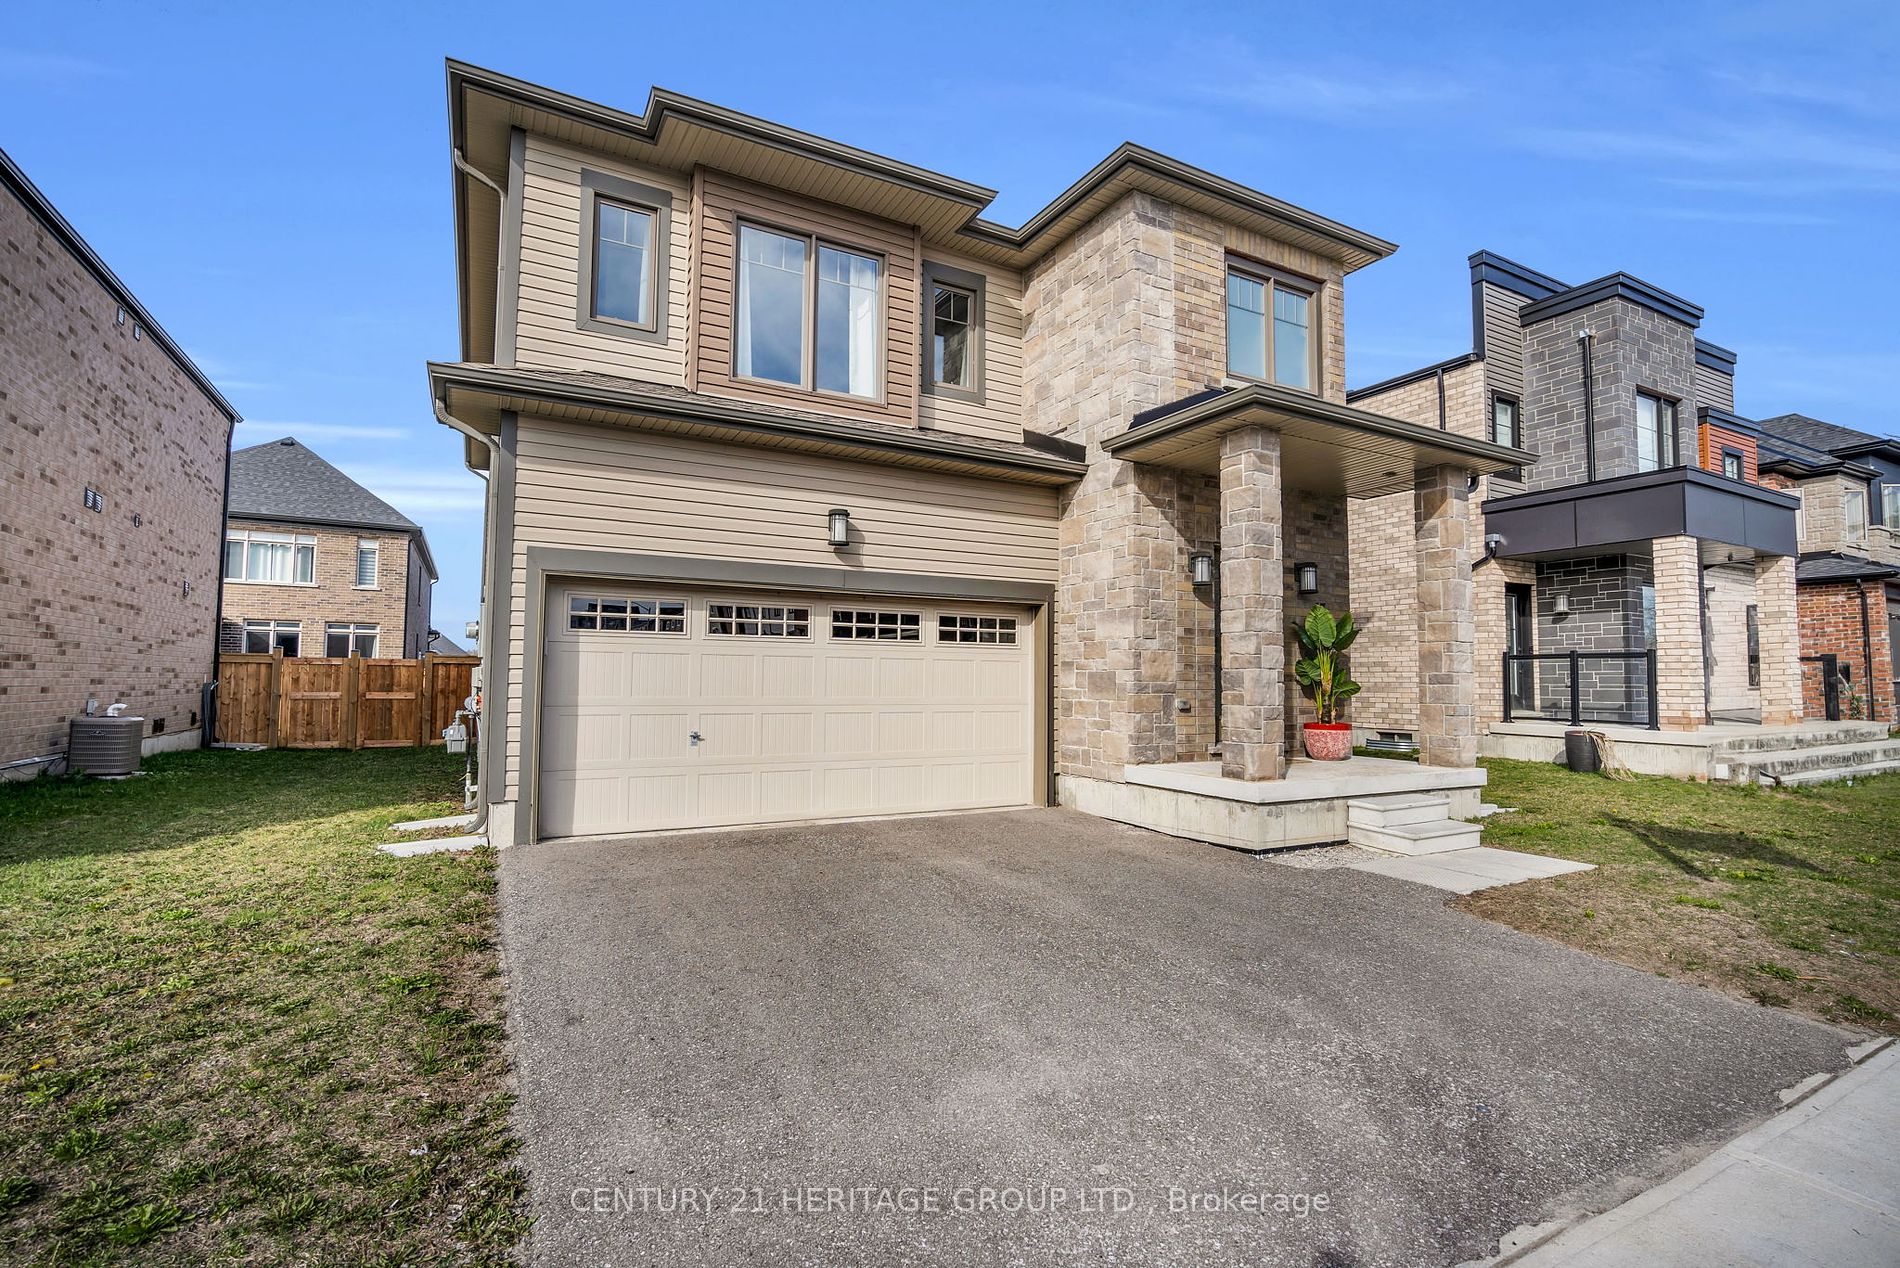 Detached house for sale at 13 Mabern St Barrie Ontario